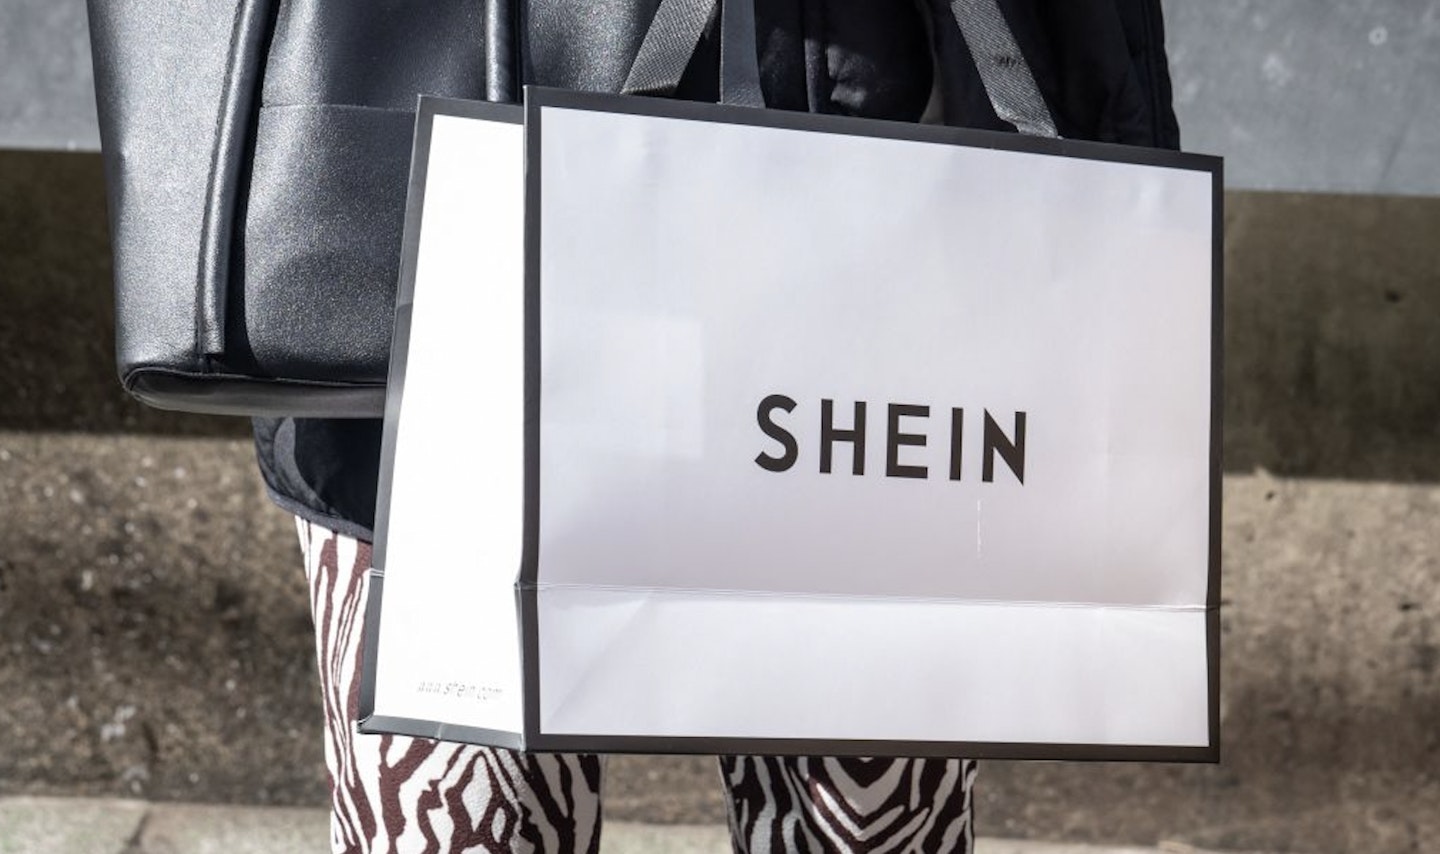 Shein Is The World's Most Popular Brand In 2022